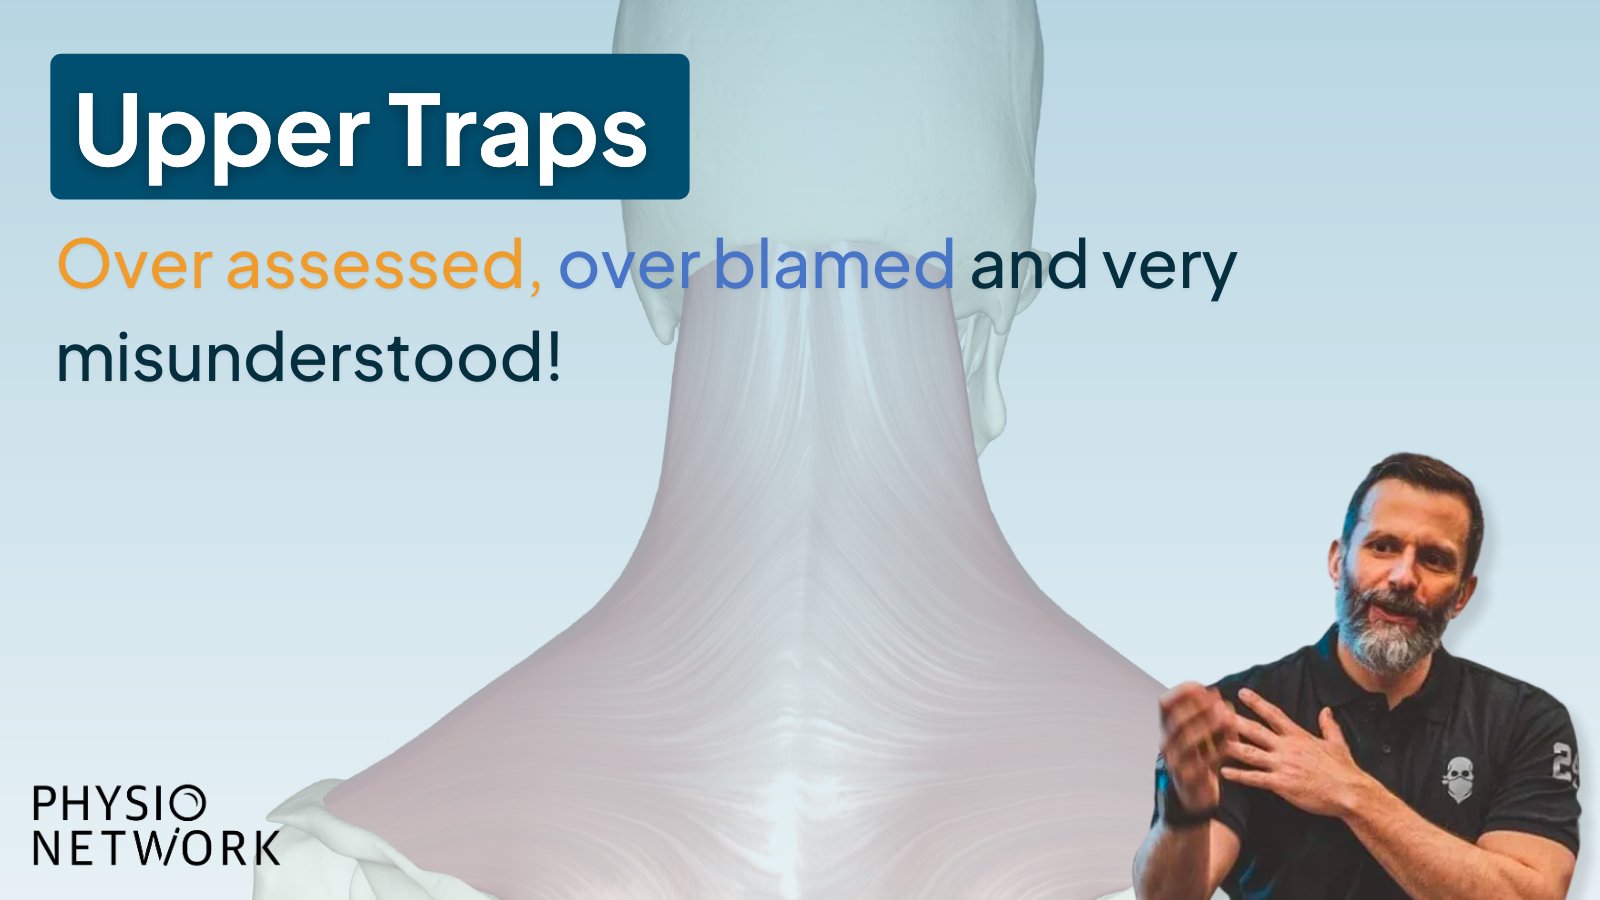 The Upper Traps: over-assessed, overblamed, and misunderstood!